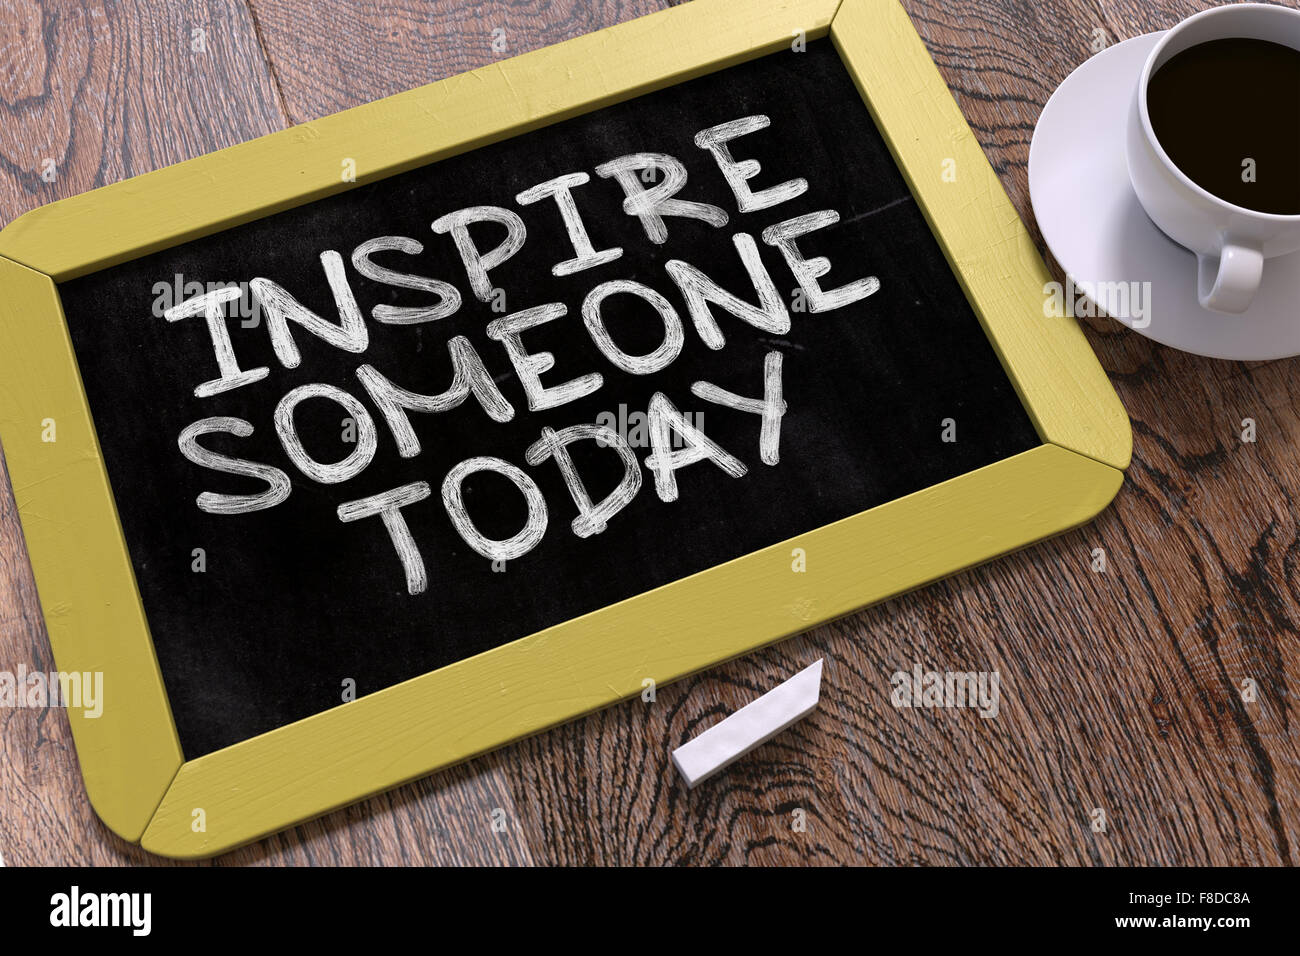 Inspire Someone Today on Chalkboard. Stock Photo